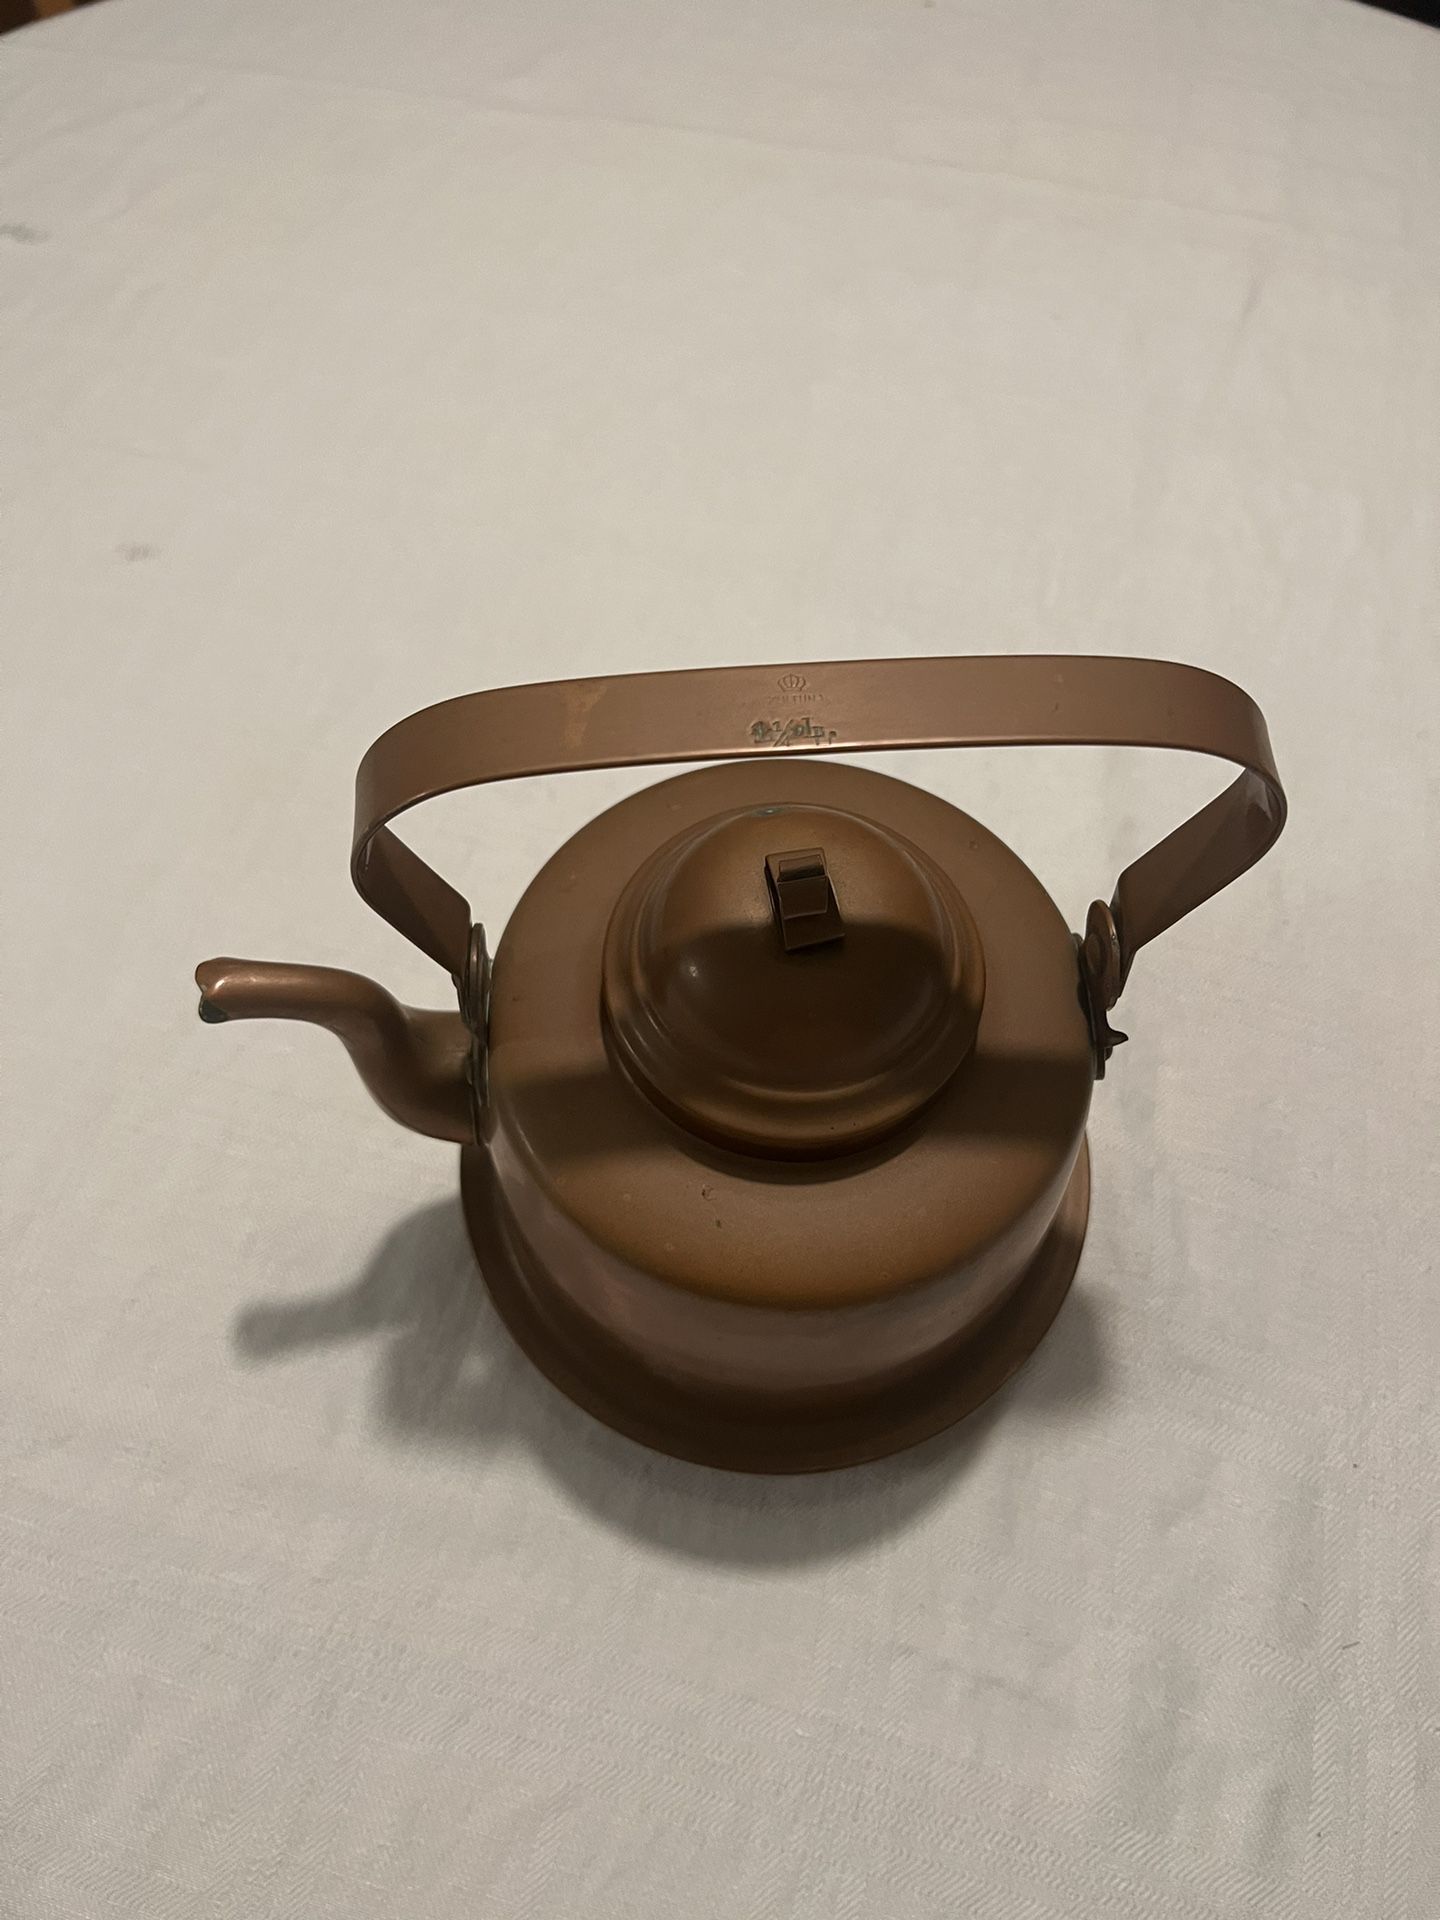 Made in Ireland, Calphalon Tea Kettle for Sale in Georgetown, TX - OfferUp